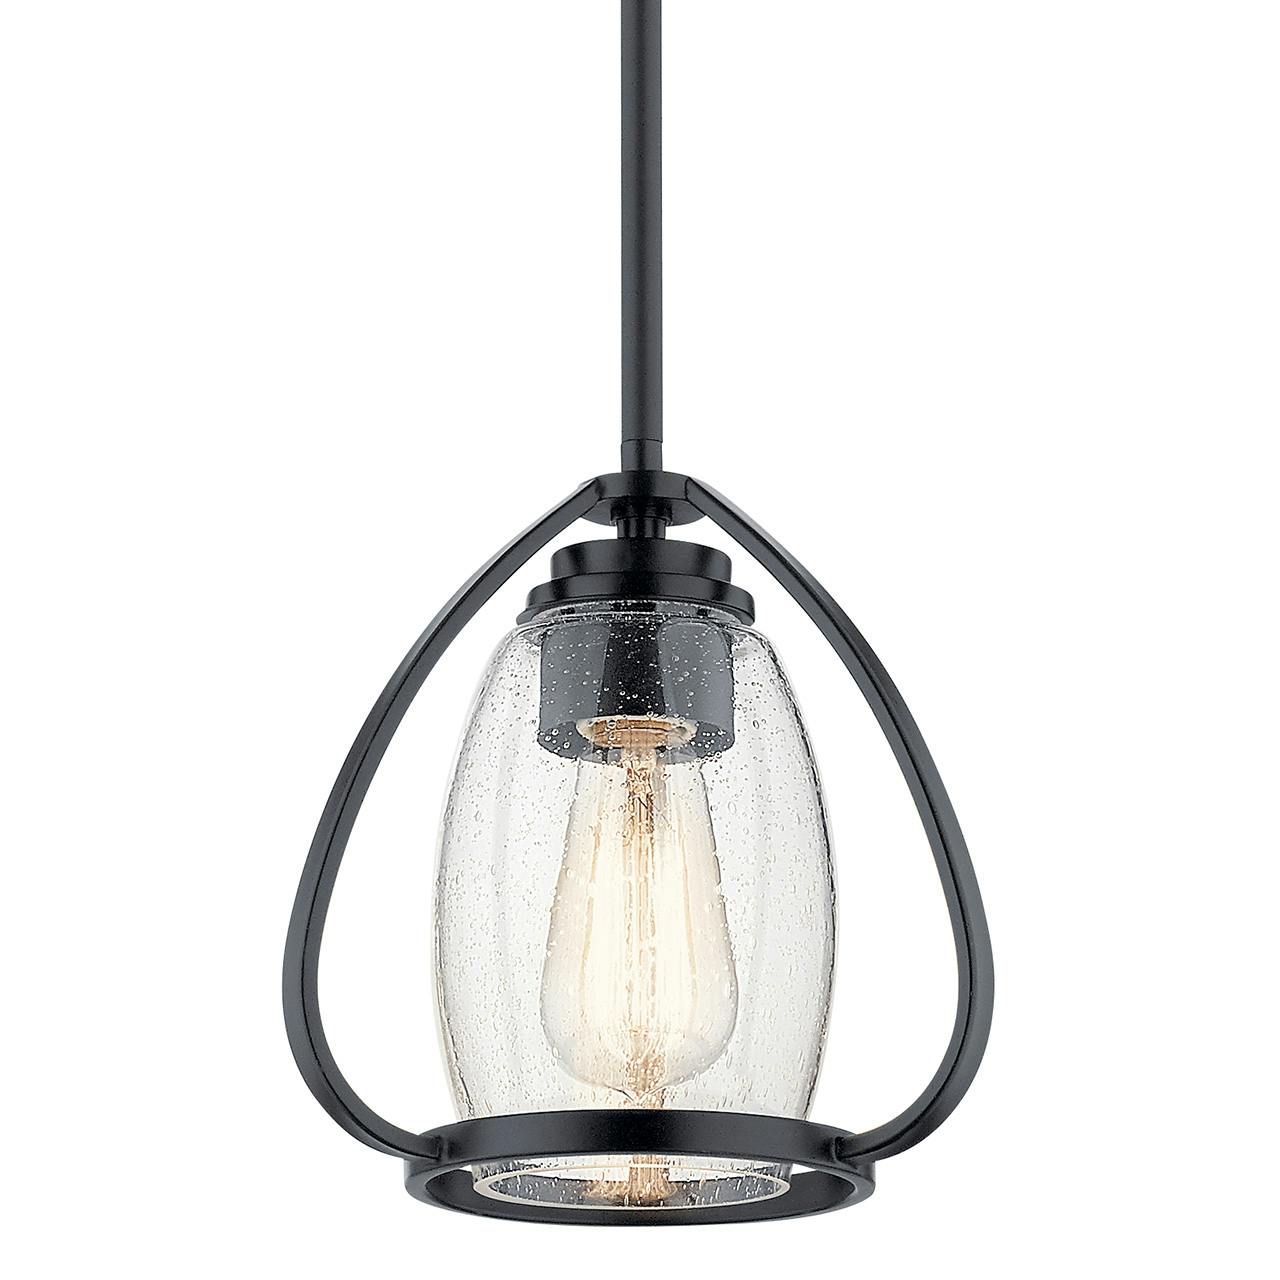 Tuscany 8.75" 1 Light Mini Pendant Black without the canopy on a white background